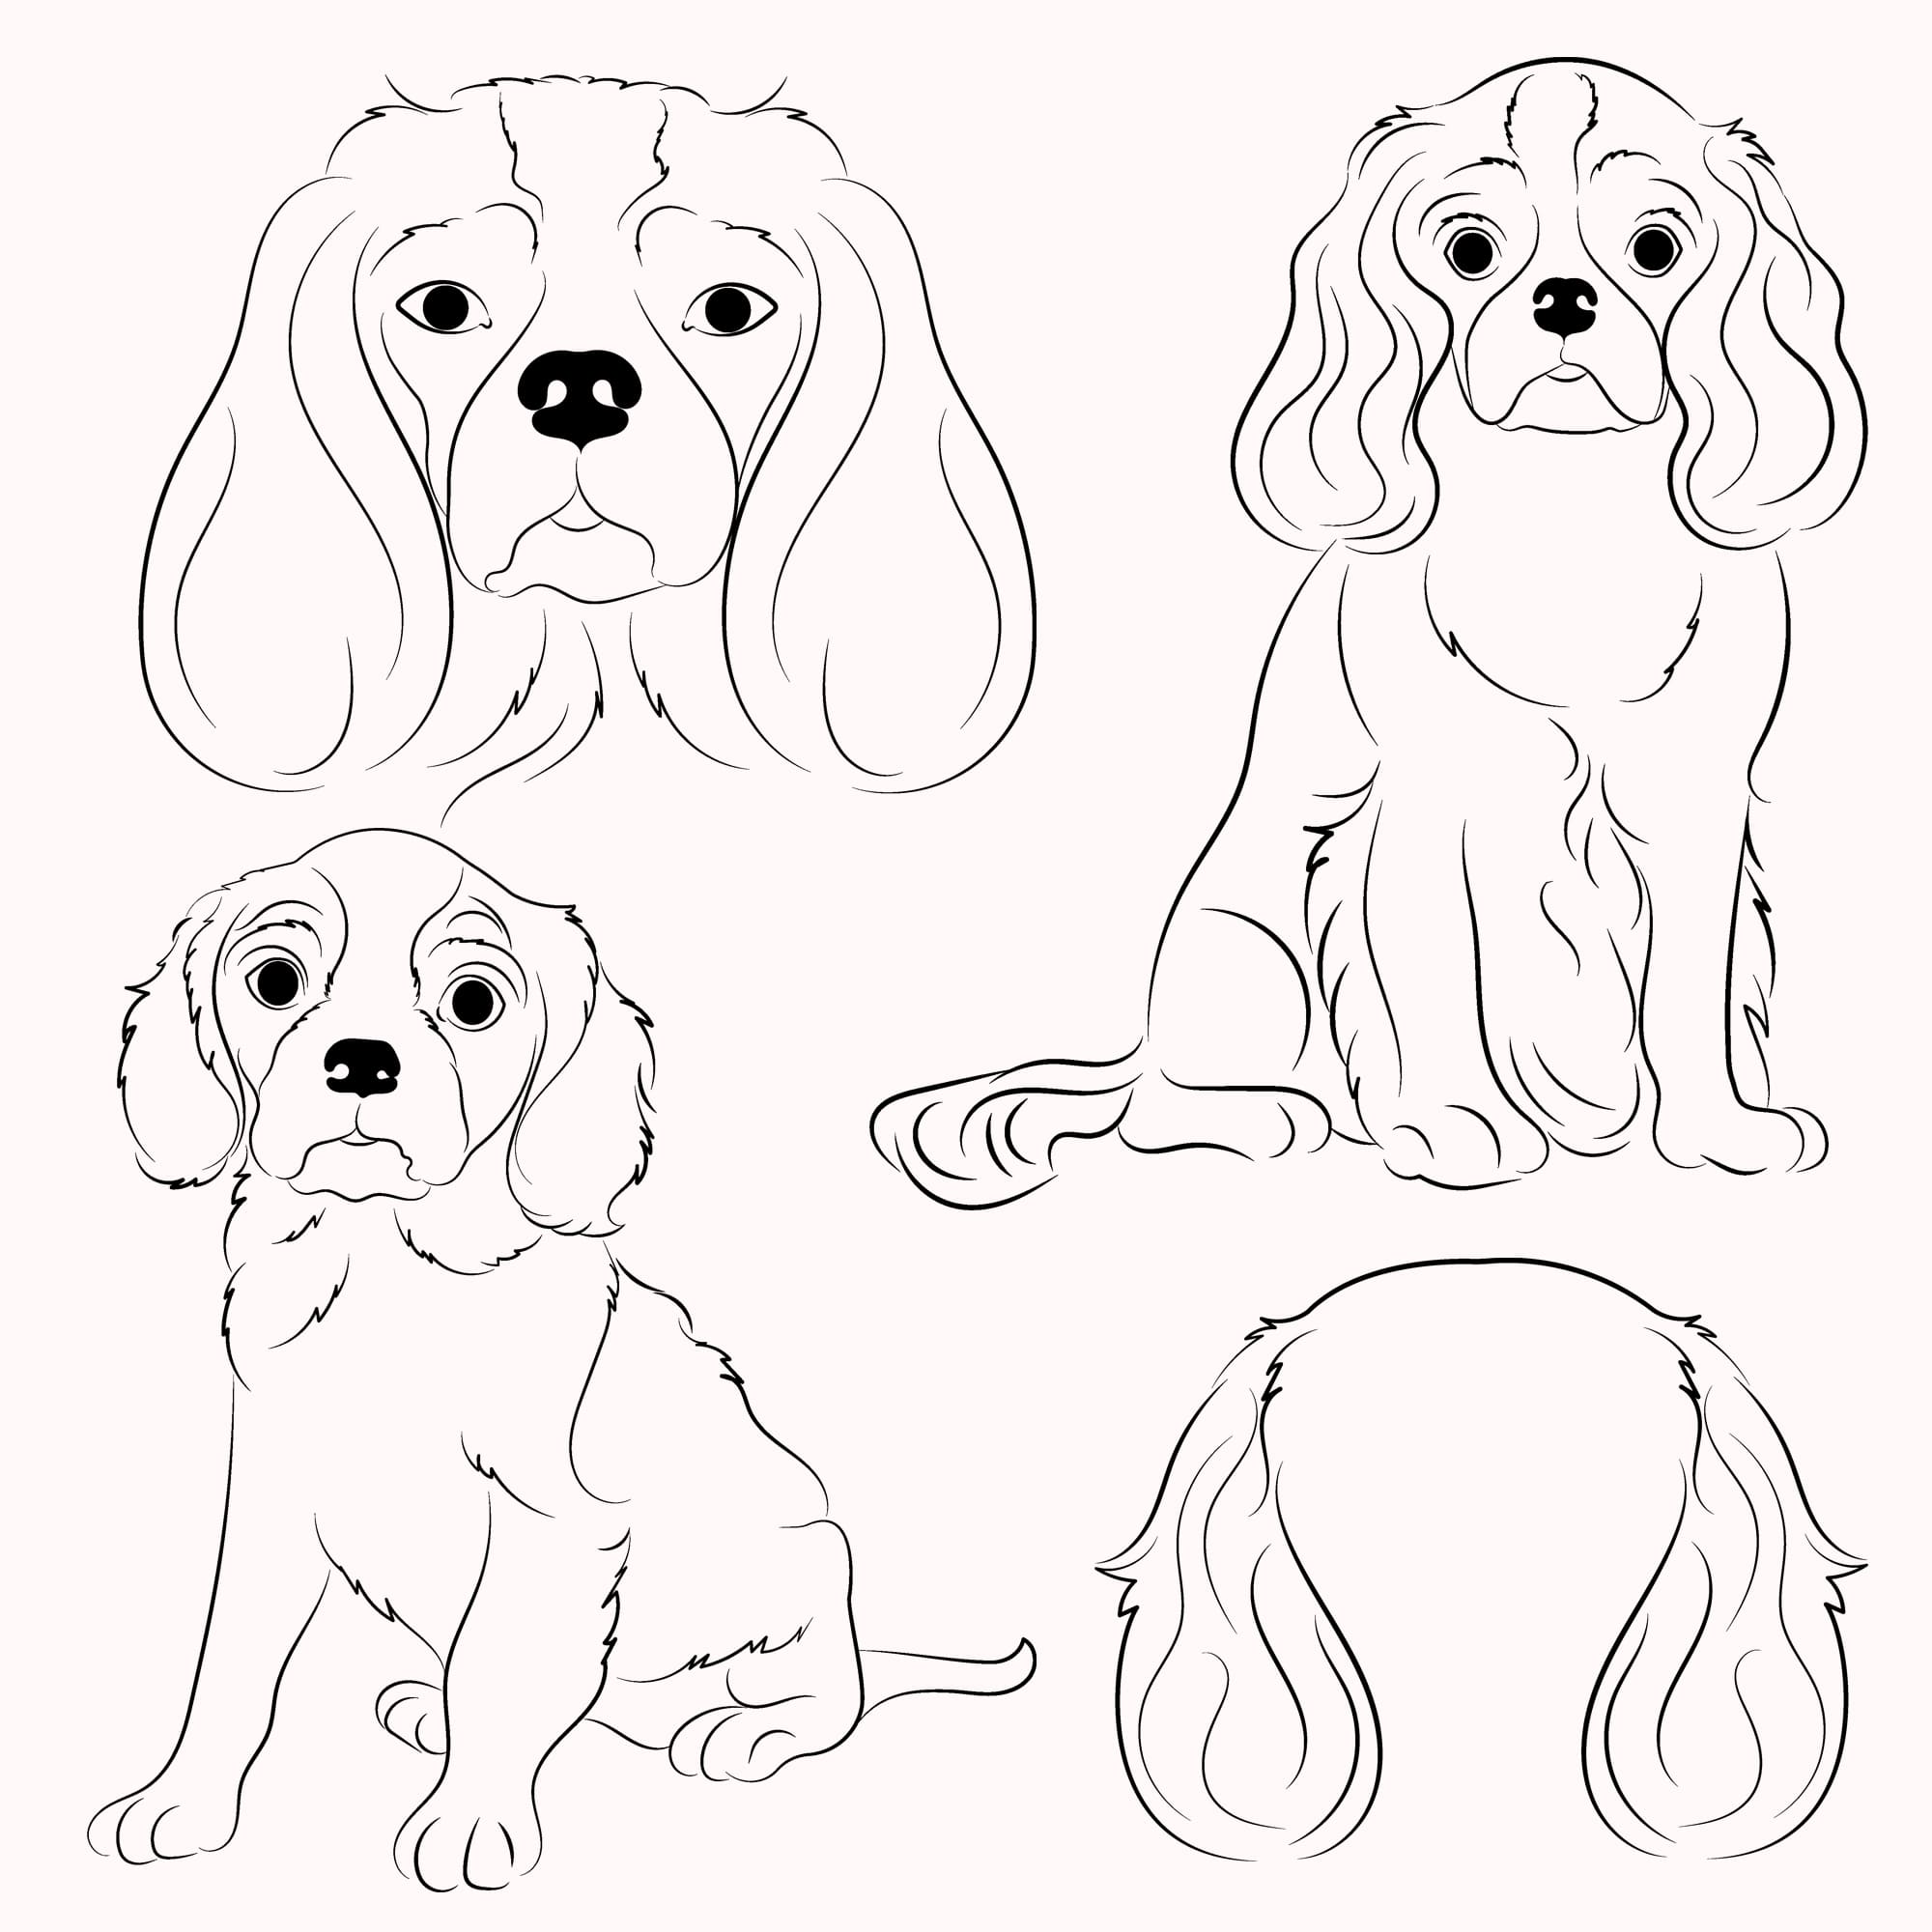 Set of four dogs in different poses.